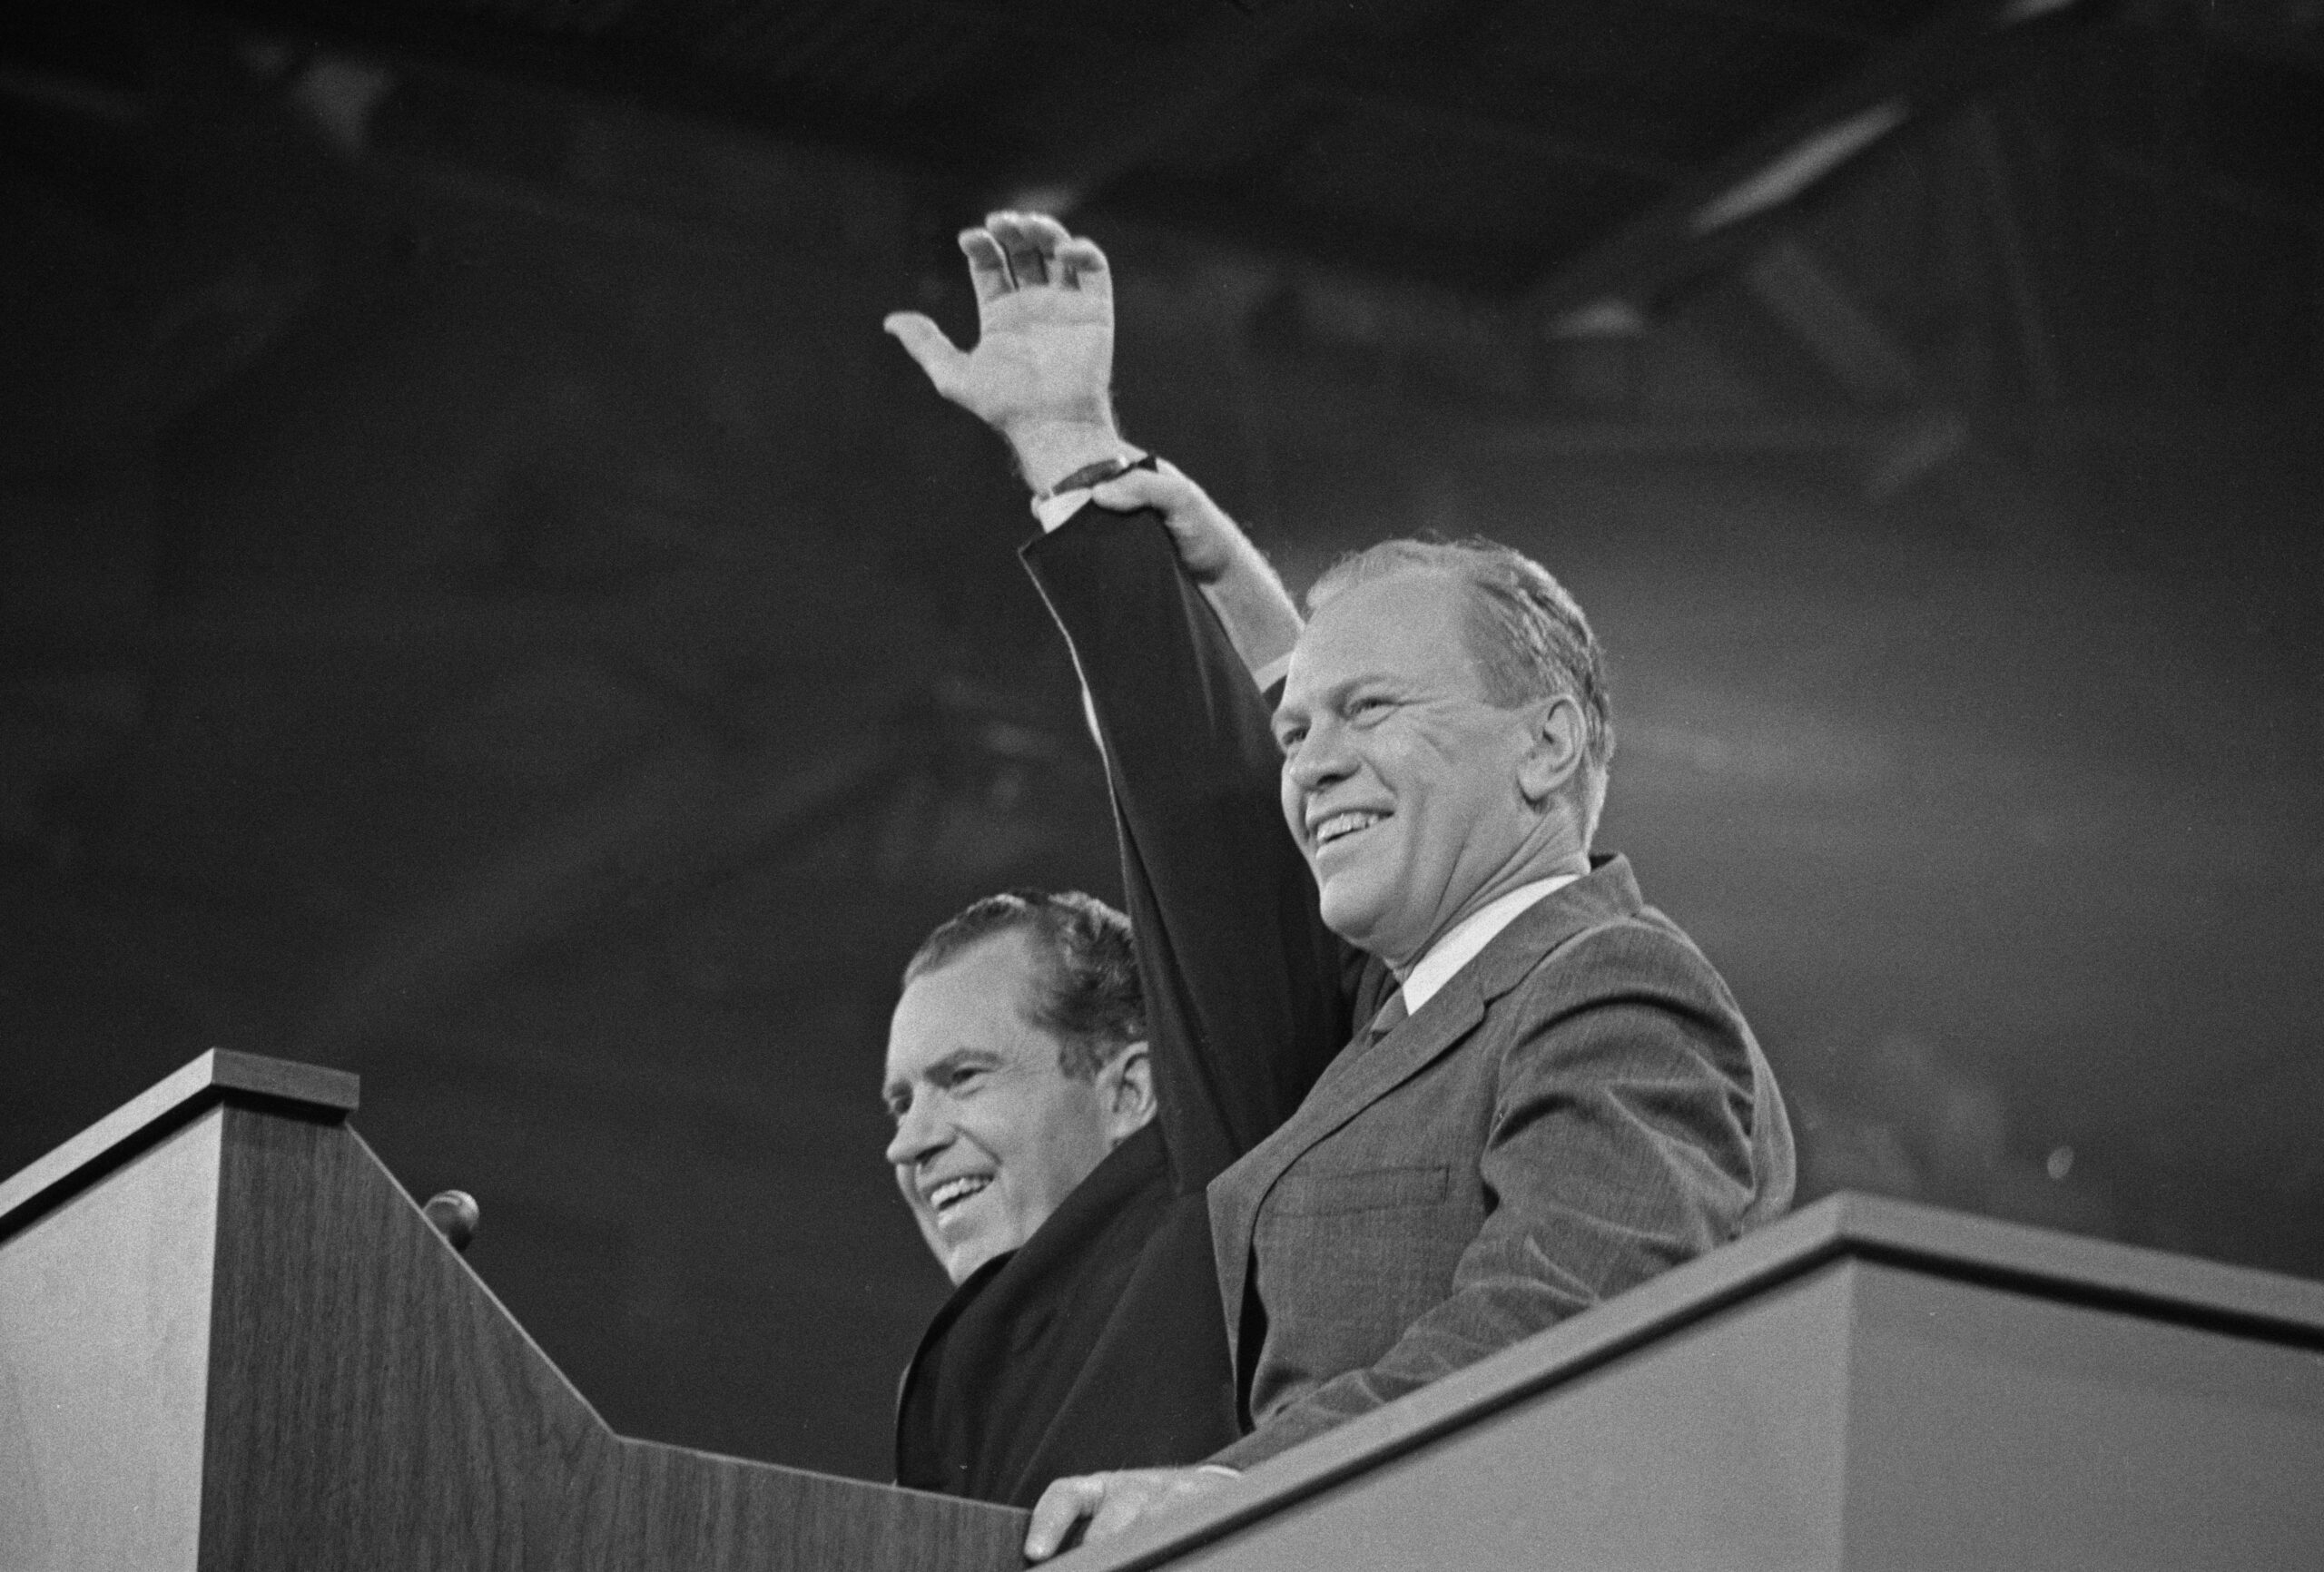 Richard Nixon and Gerald Ford at the Republican National Convention, Miami Beach, Florida, August 8, 1968 (Graphic House / Hulton Archive via Getty Images)